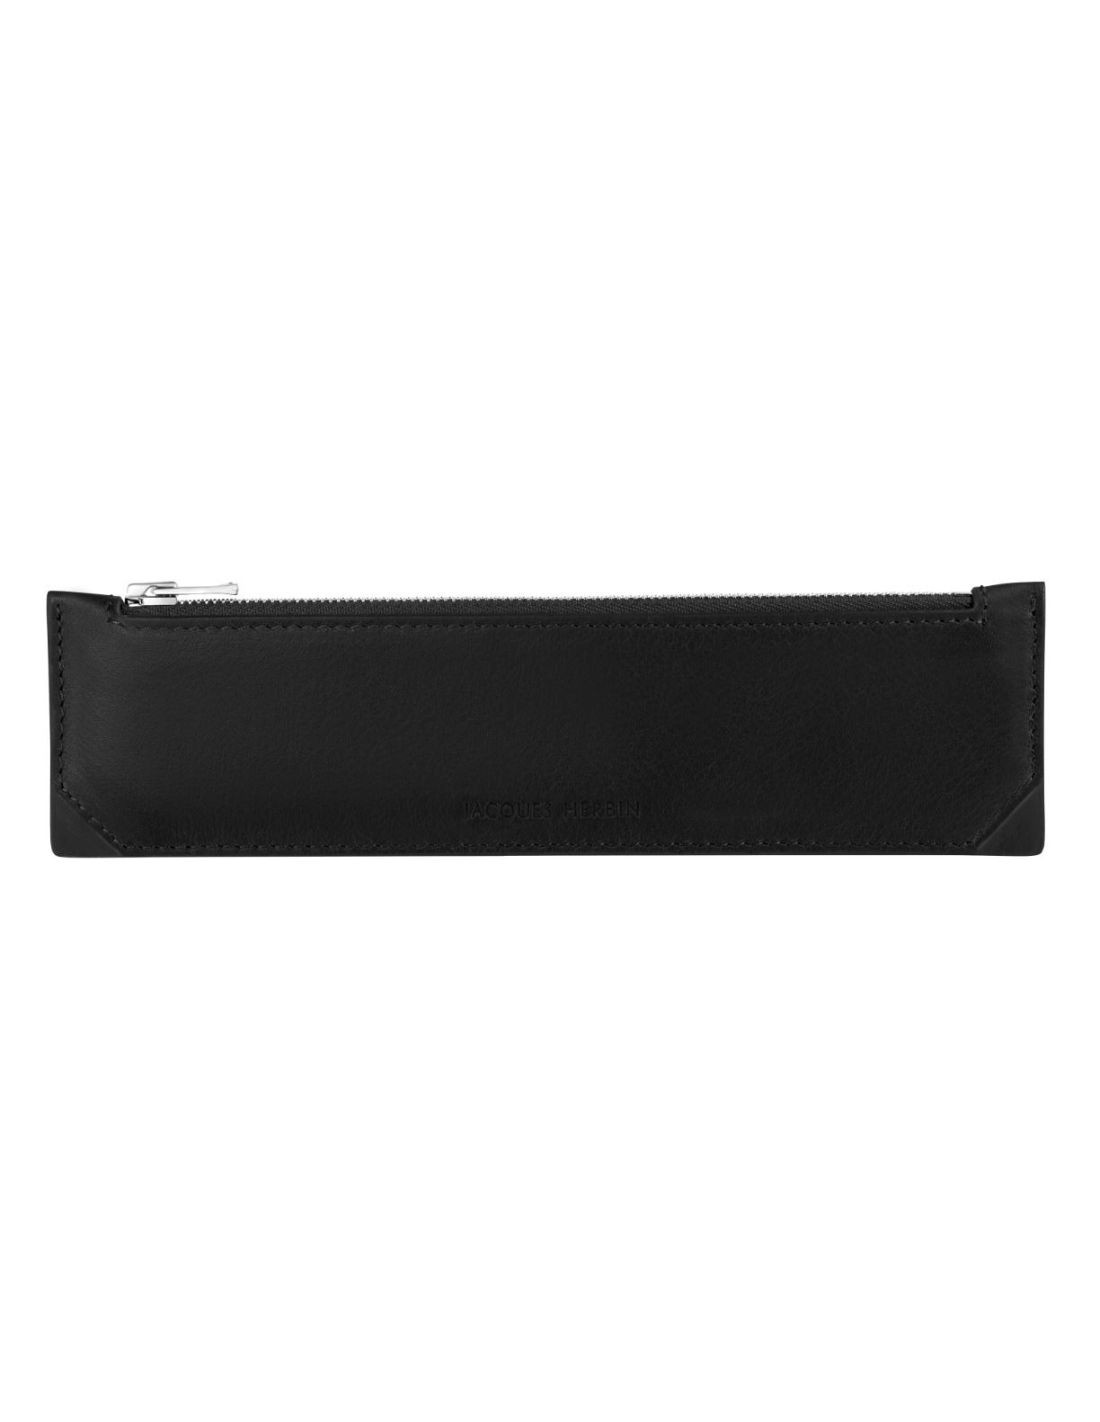 Leather Pencase - Small - Black - Jacques Herbin